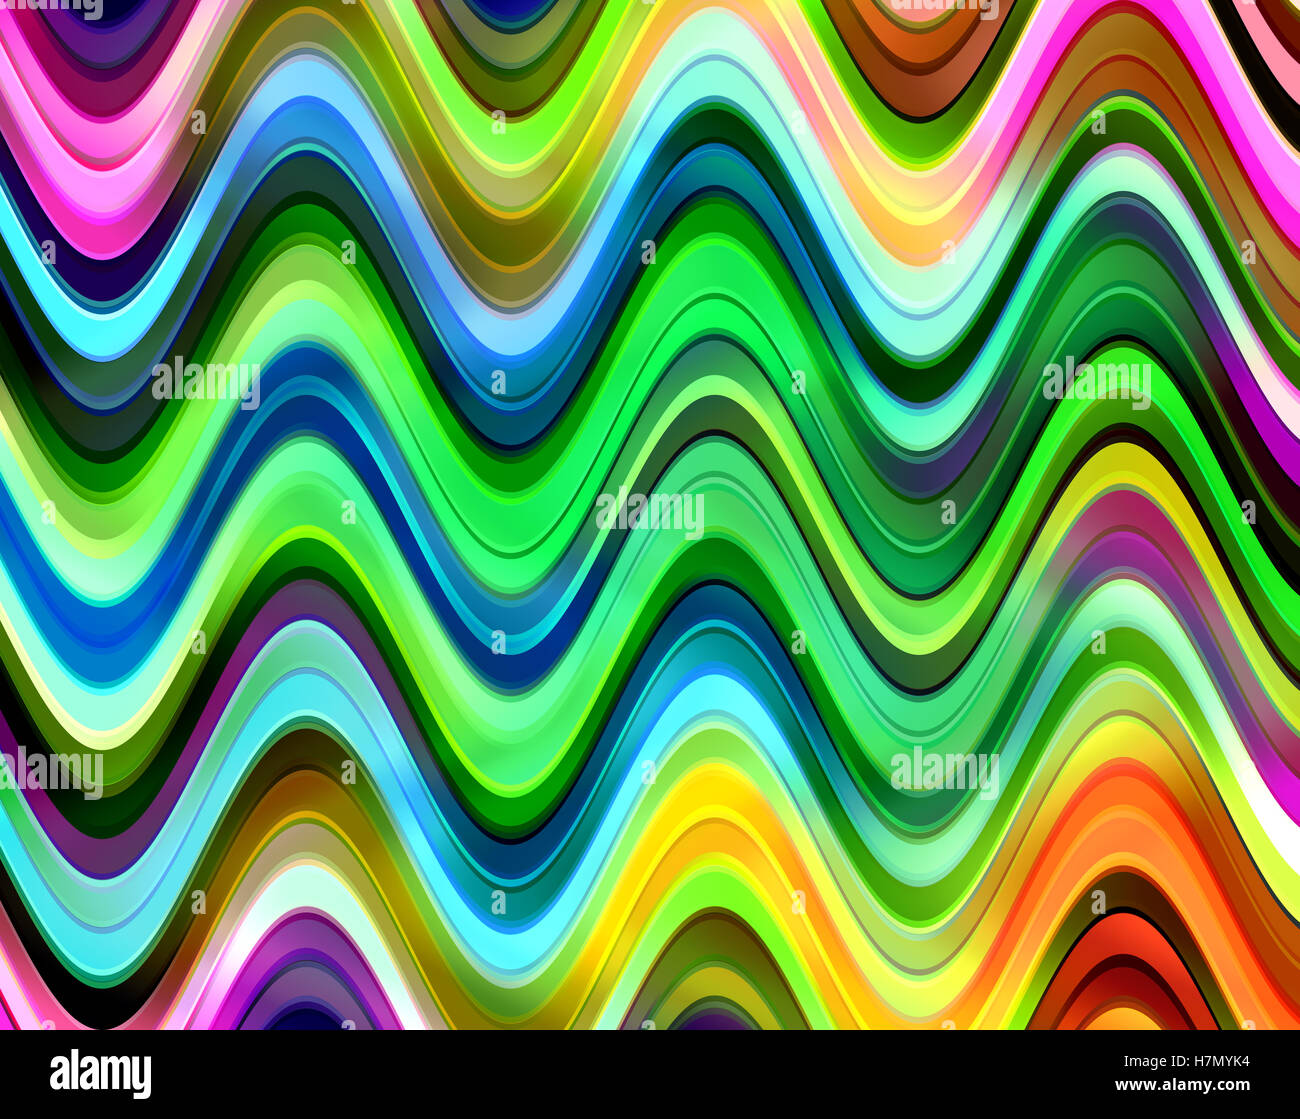 Multicoloured glowing digital waves pattern abstract illustration. Stock Photo